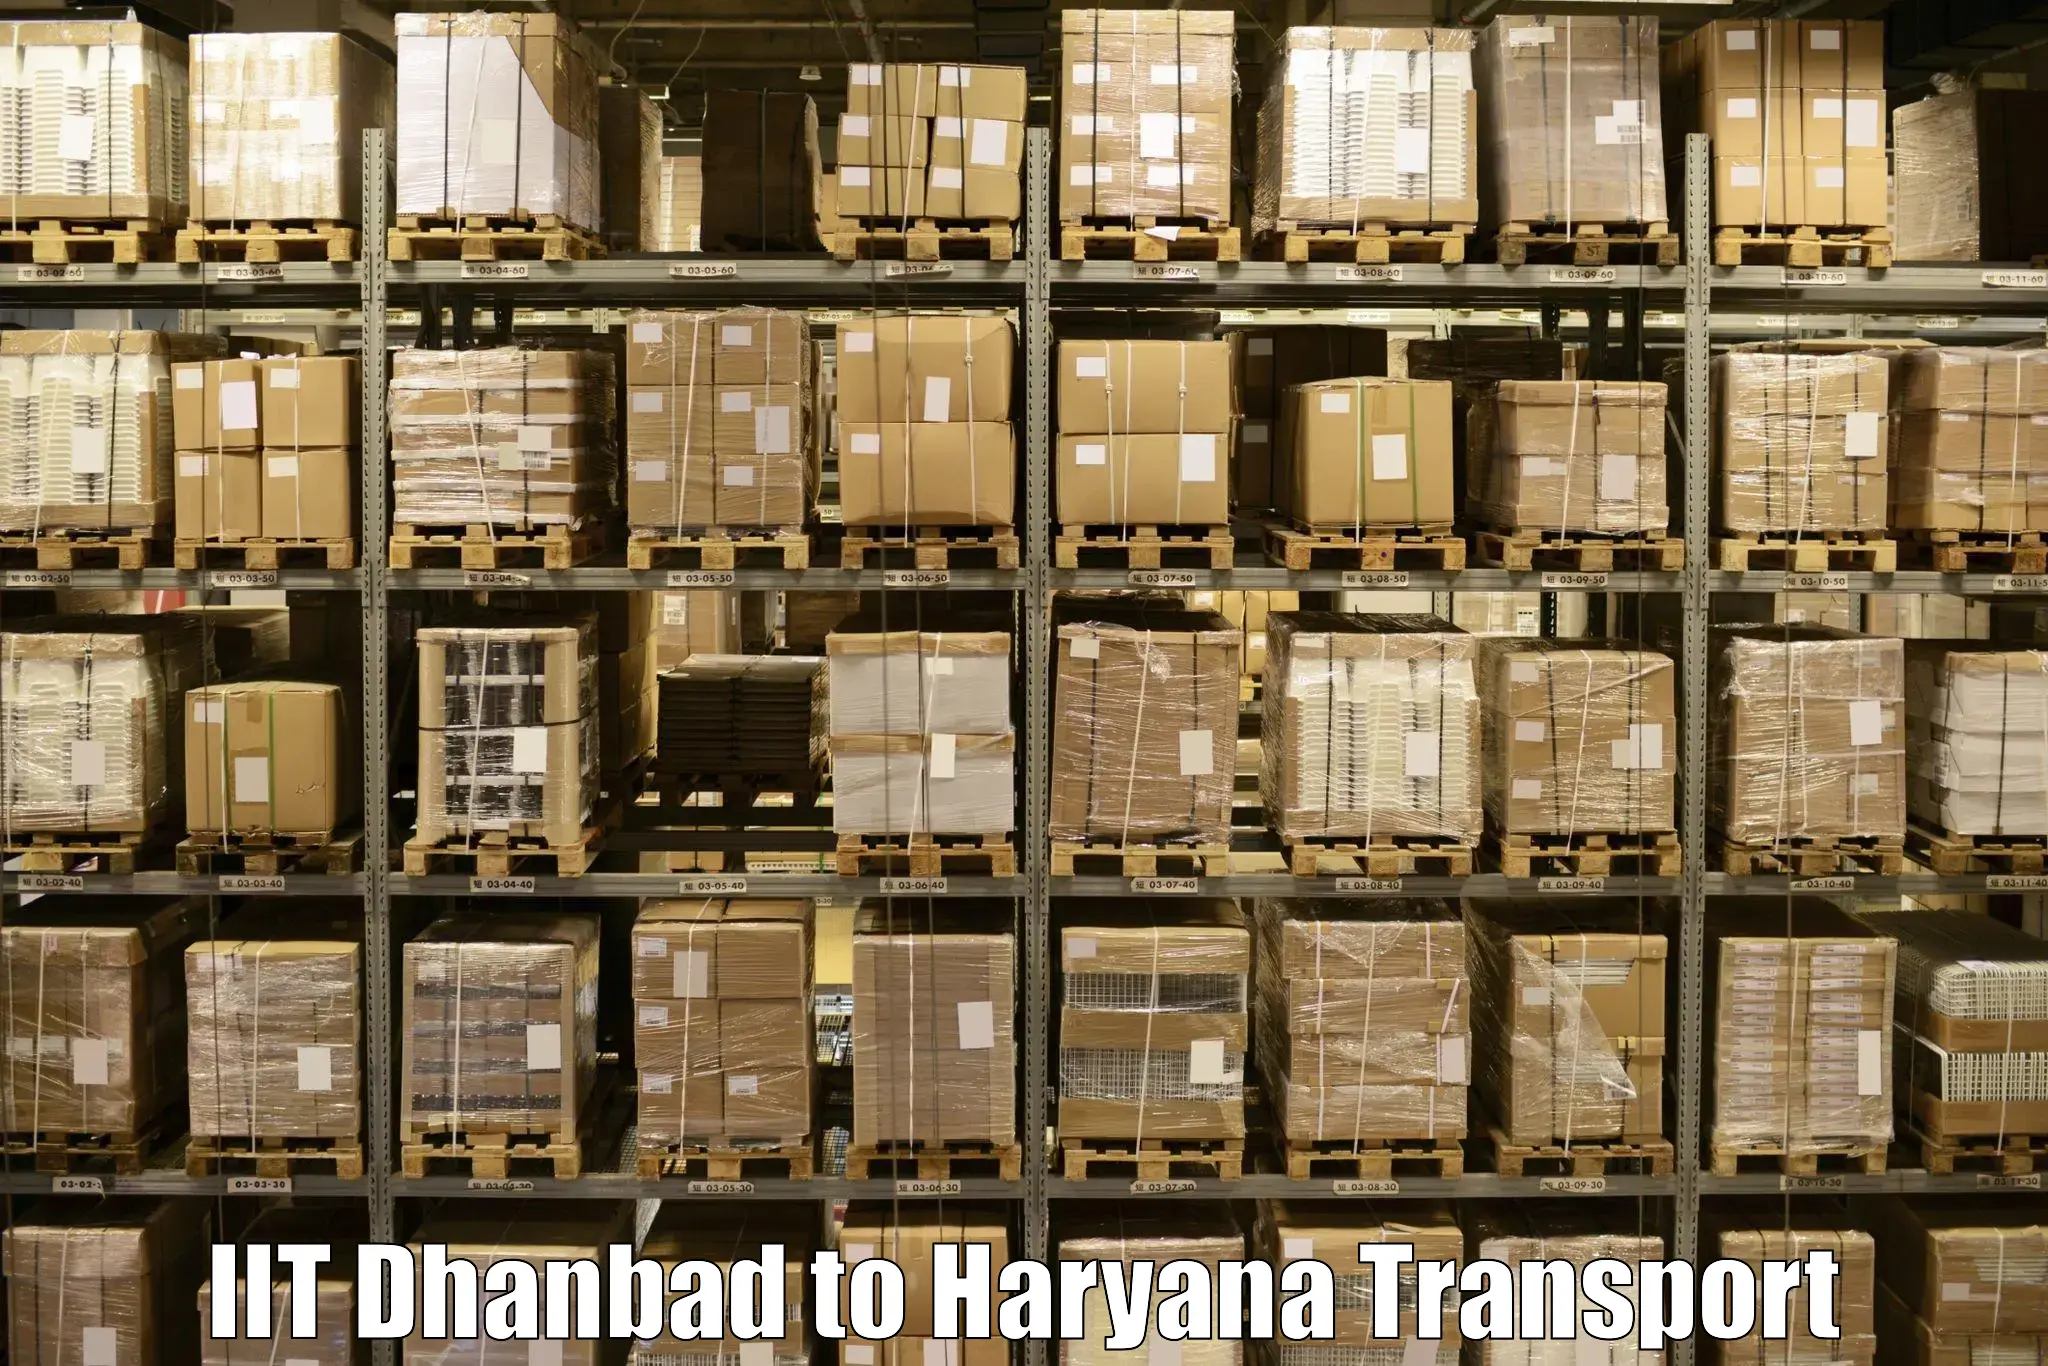 Domestic transport services in IIT Dhanbad to Bilaspur Haryana